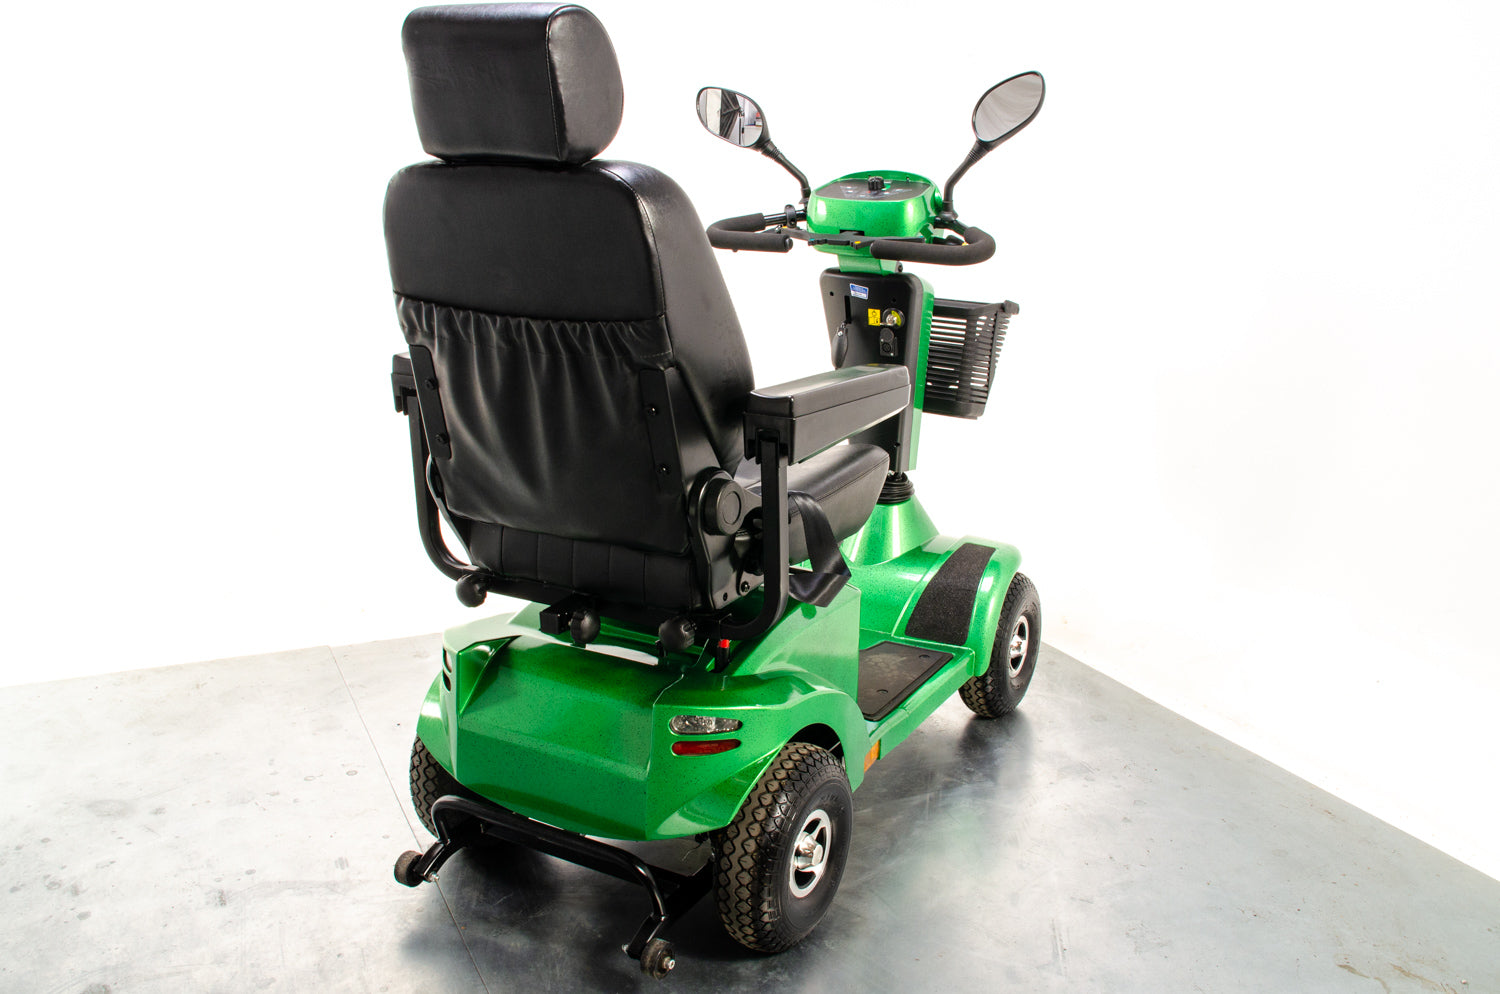 Sunrise Medical Sterling S425 Used Mobility Scooter 8mph Christmas Tree Sparkle Midsize Pneumatic Pavement 13296